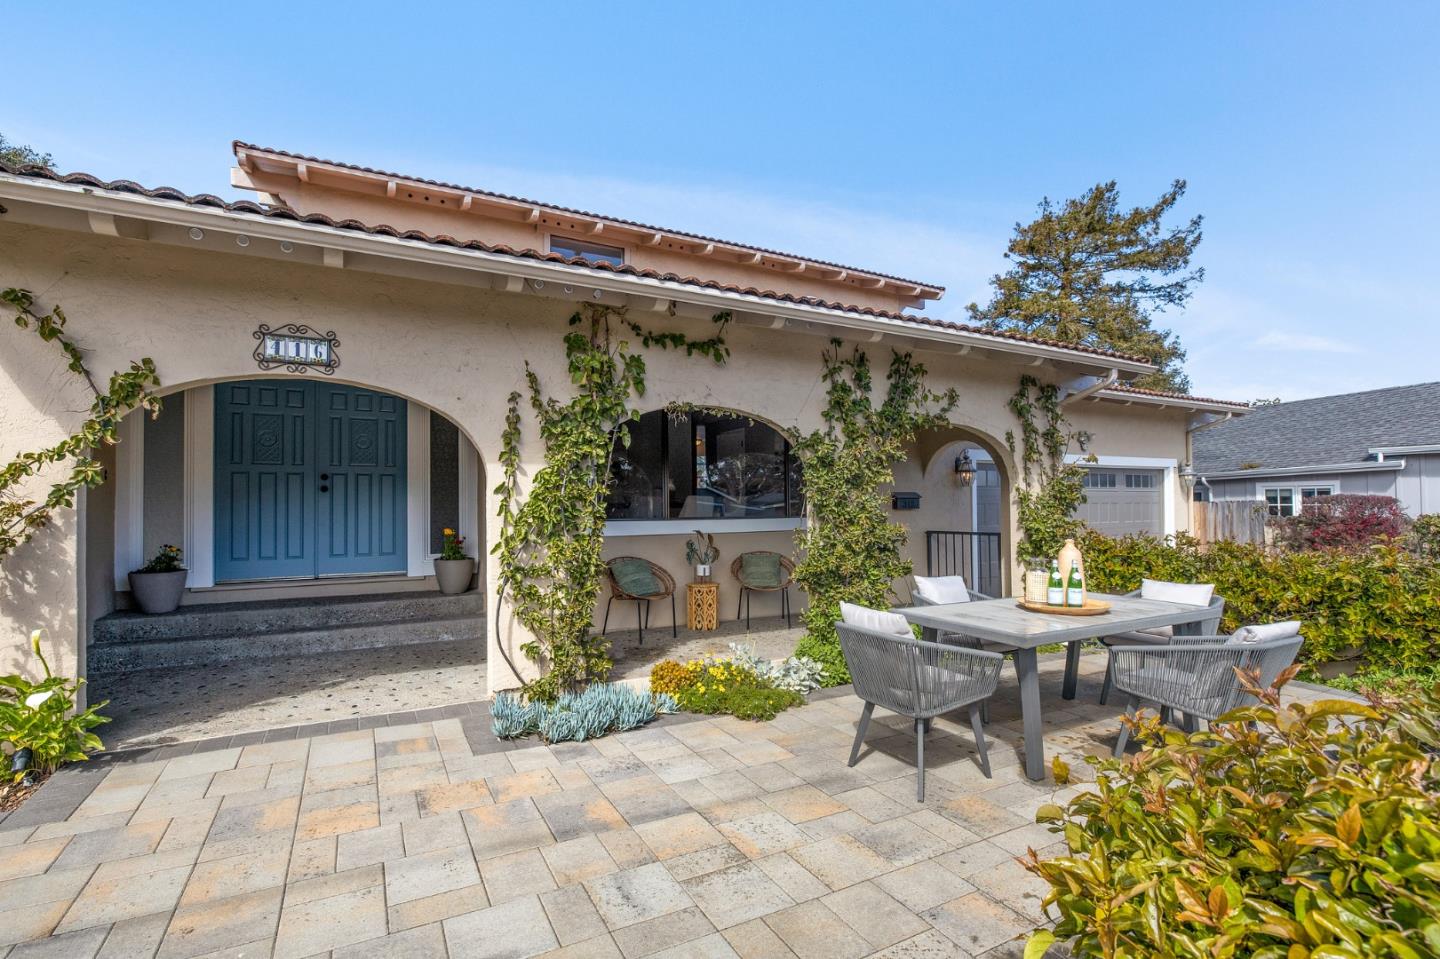 Just seven blocks to the beautiful Monterey Bay, this Pacific Grove Mediterranean coastal home is comprised of more than 2,200+ sq ft. The 1,662 sq ft ground-level features a comfortable living room made cozy by the grand fireplace, a formal dining room, and a recently updated kitchen with sit-up counter that joins with the family room. Additionally, the main level has a large ensuite bedroom with sliding doors to the private paver-covered backyard. Upstairs with a peak of the ocean, is an oversized ensuite bedroom with two closets and enough space for a sitting area spread across 581 sq ft (once two bedrooms, made into one). A 500+ sq ft two-car garage with JuiceBox EV charger, laundry area and workspace with a sliding door allows for natural light. Extending the house is the east-facing patio that warms up on sunny mornings. A large home ready to move into, it's an easy seven block stroll to Robert Down School and just a few more to restaurants and shopping of downtown Pacific Grove.